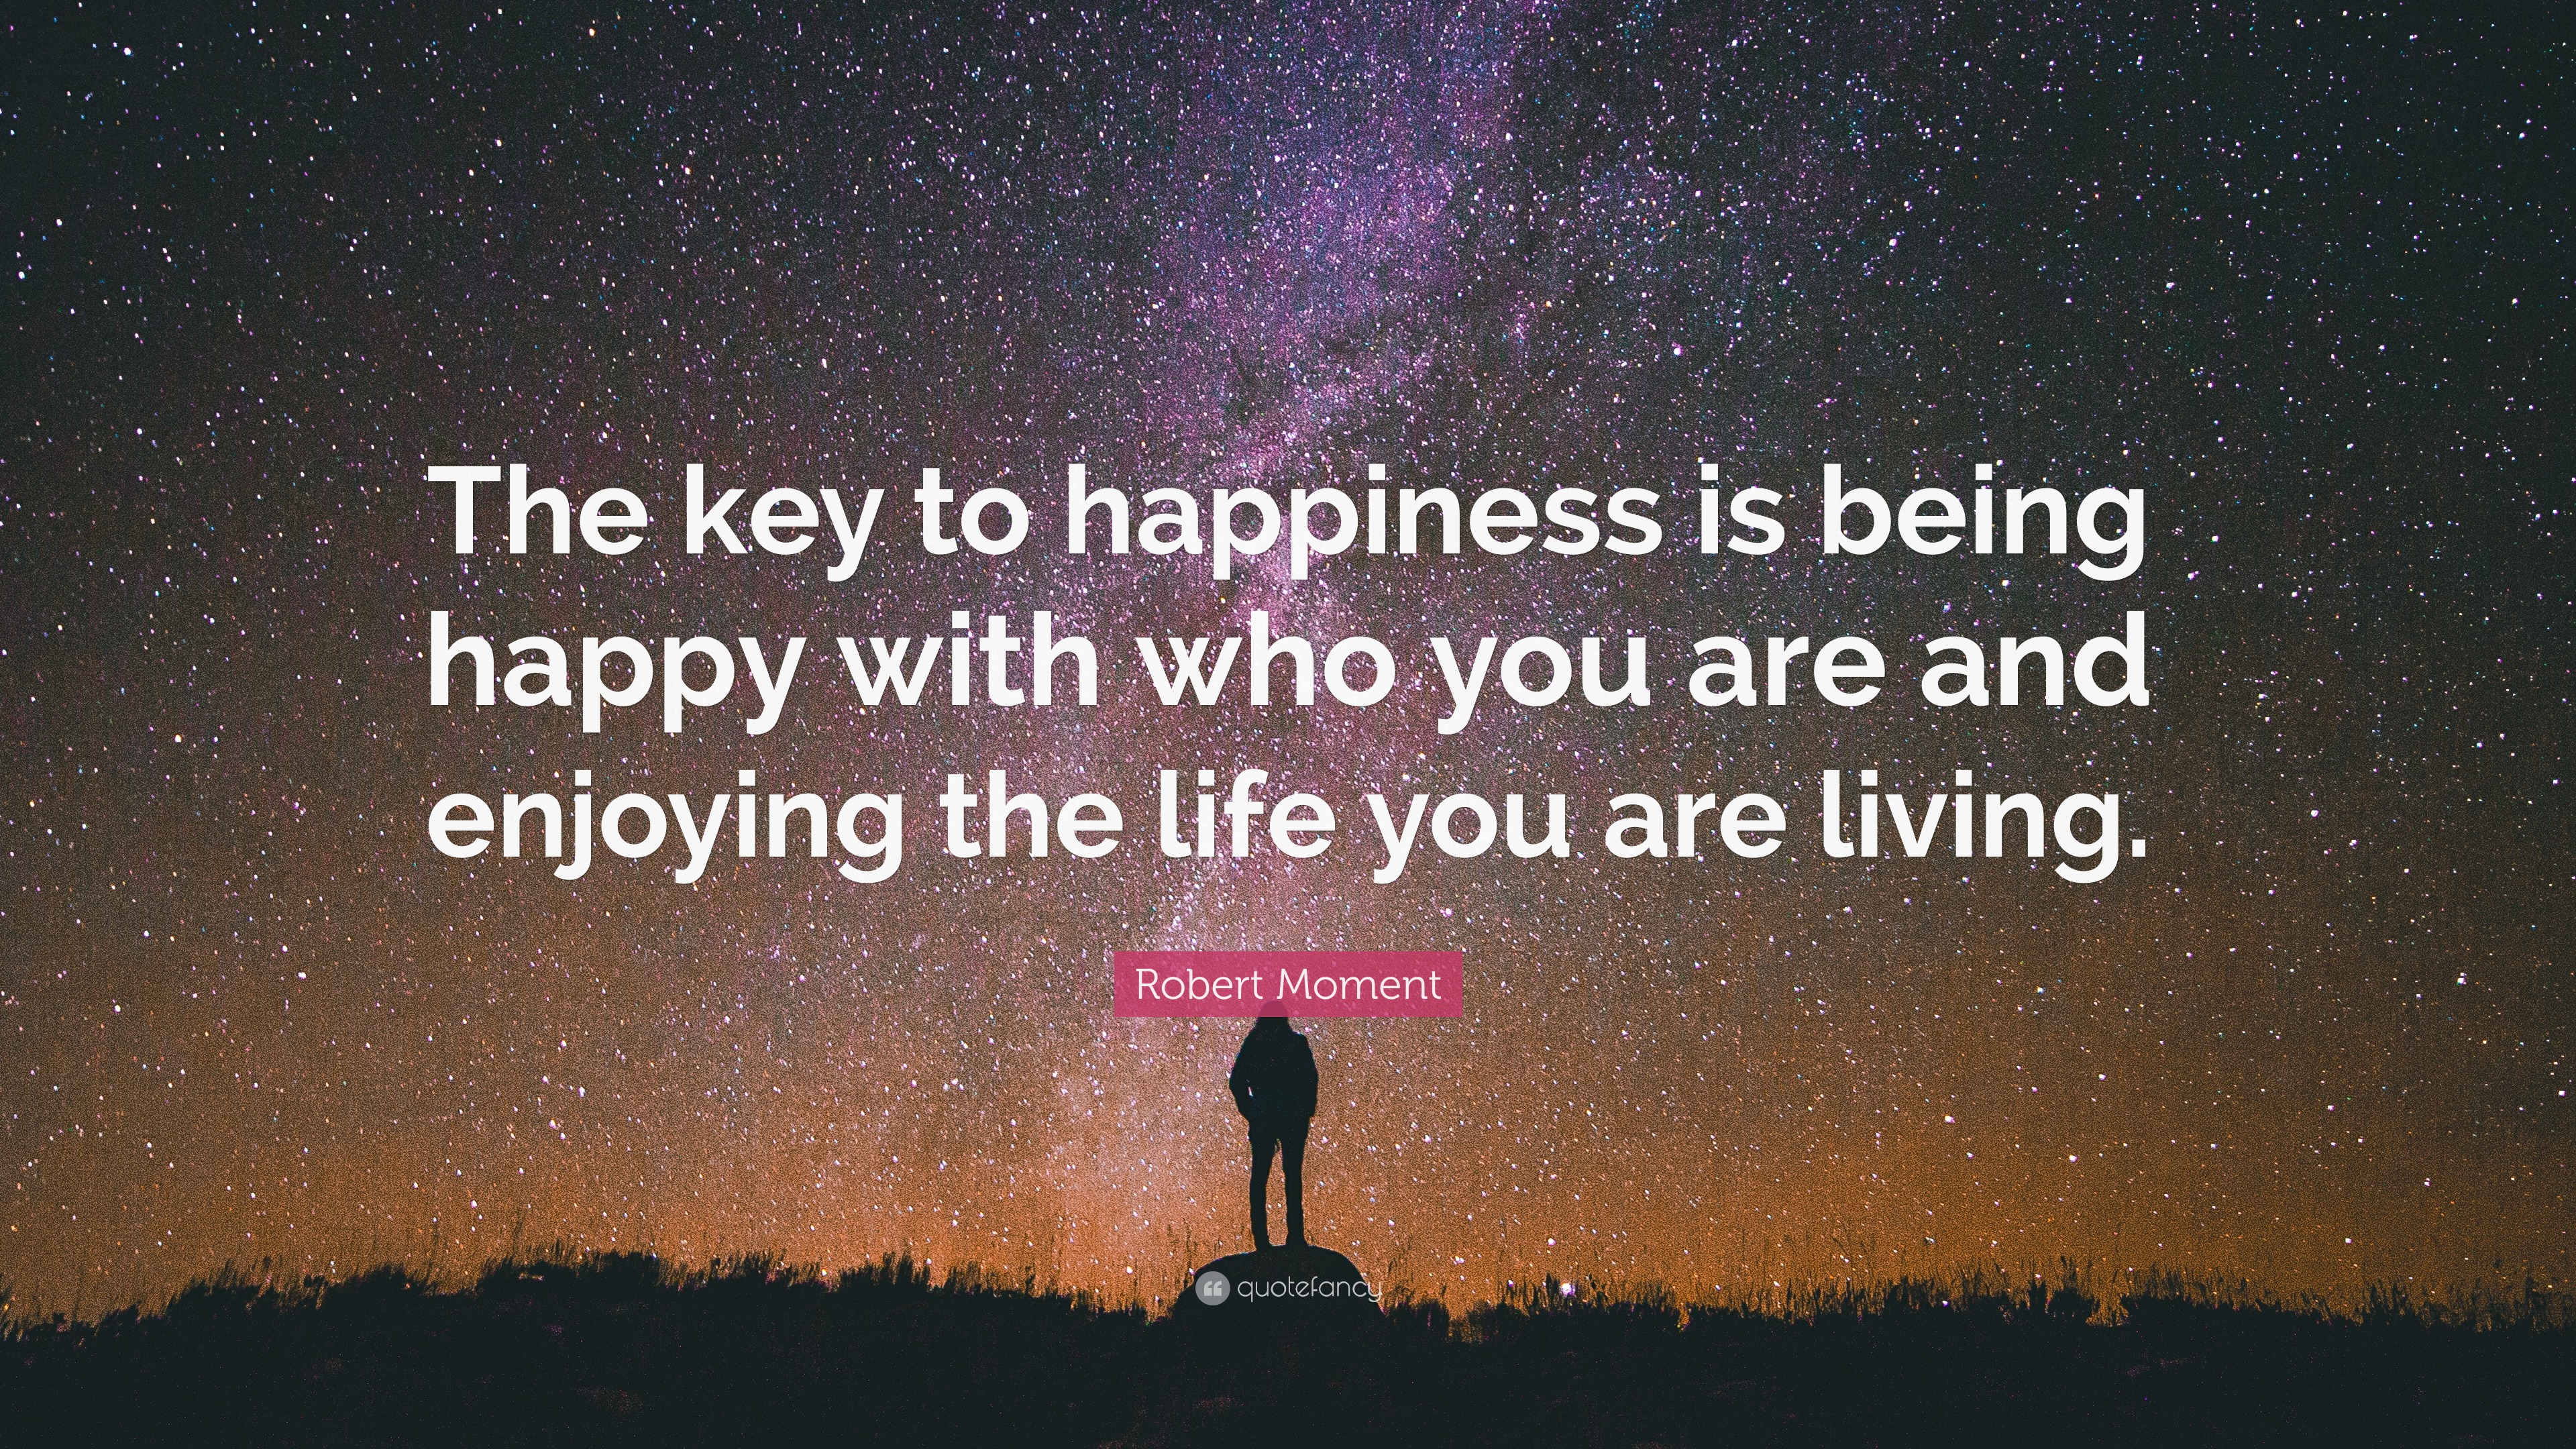 Robert Moment Quote: “The key to happiness is being happy with who you are  and enjoying